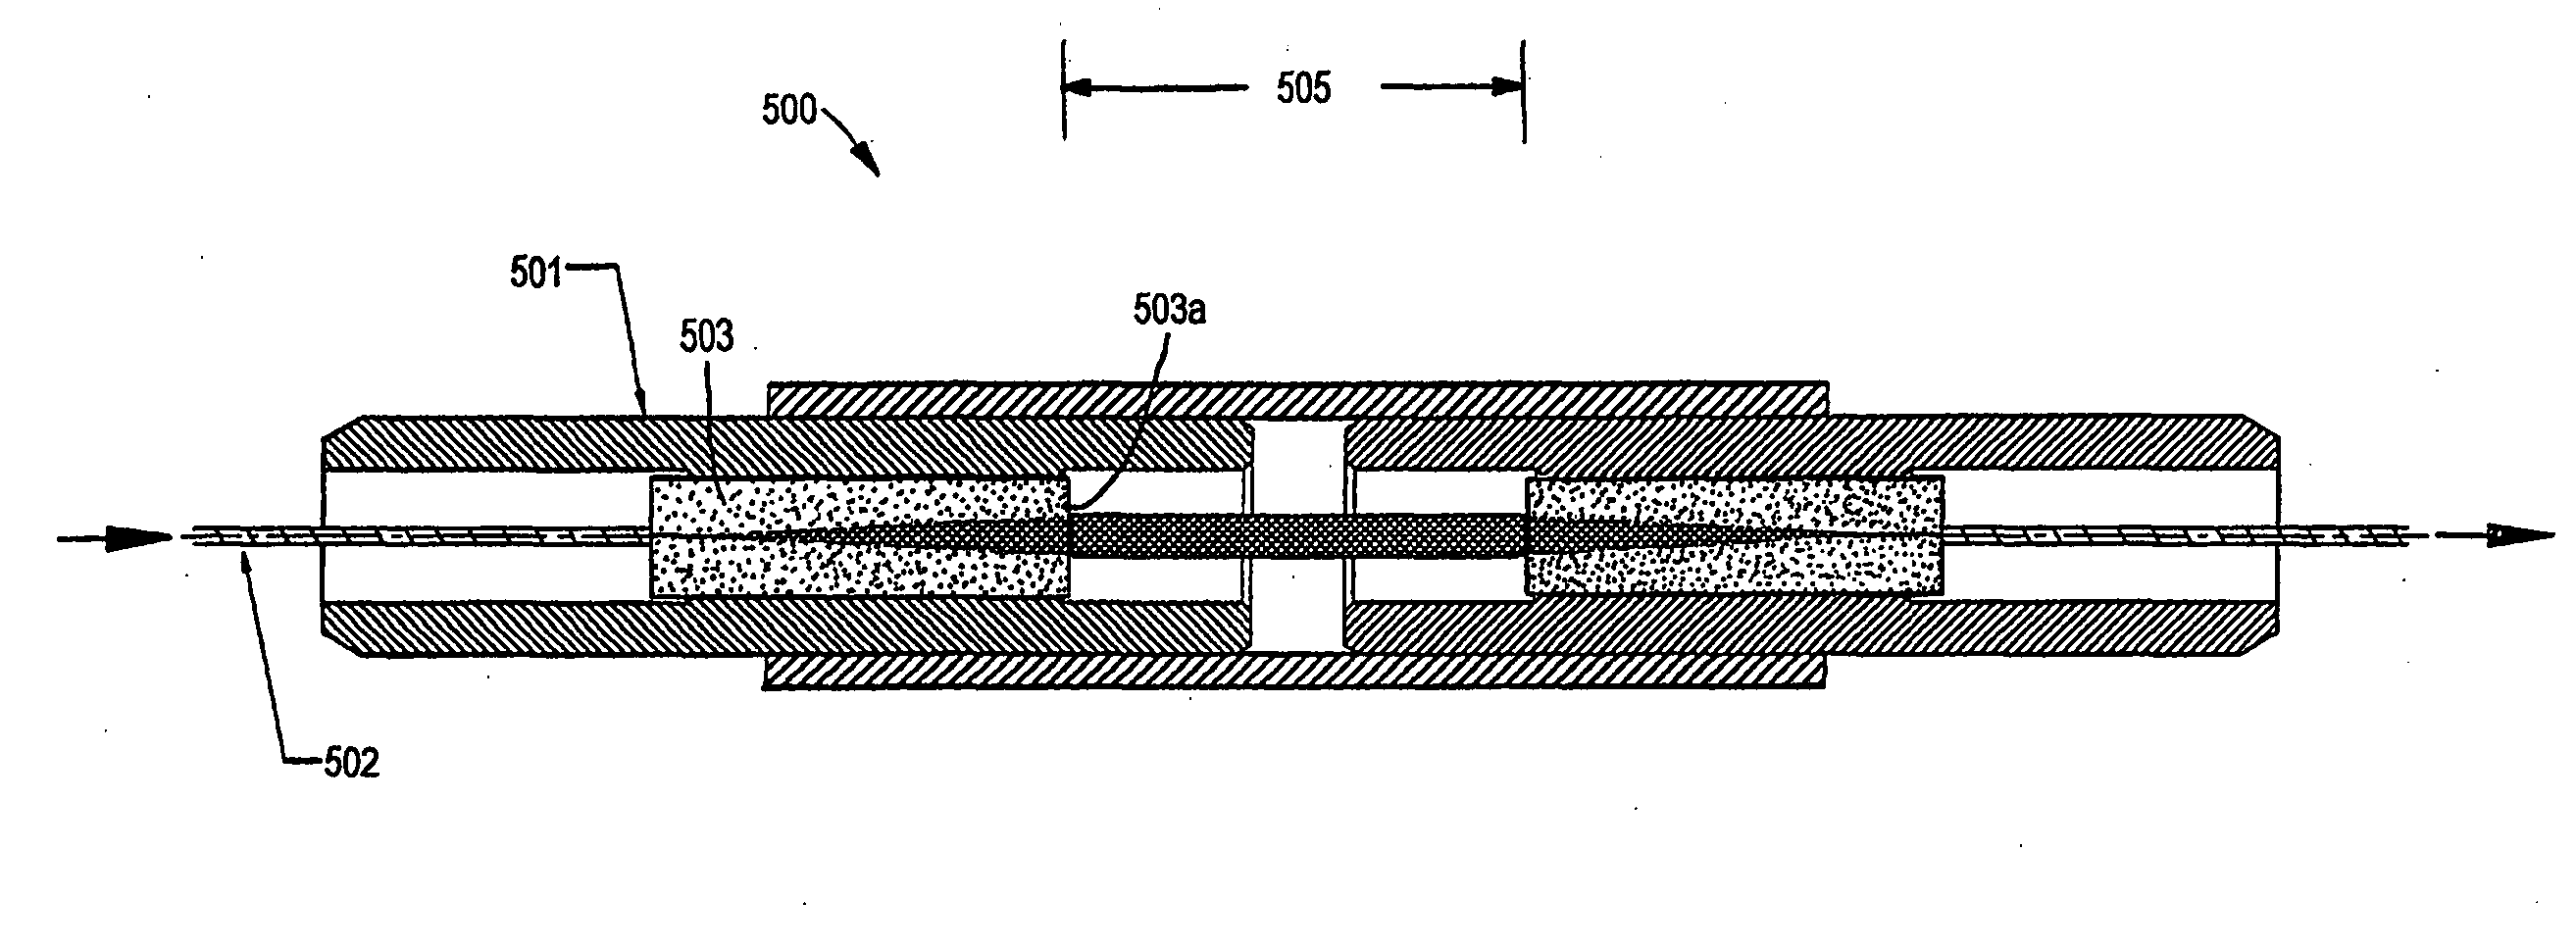 Expanded beam connector system